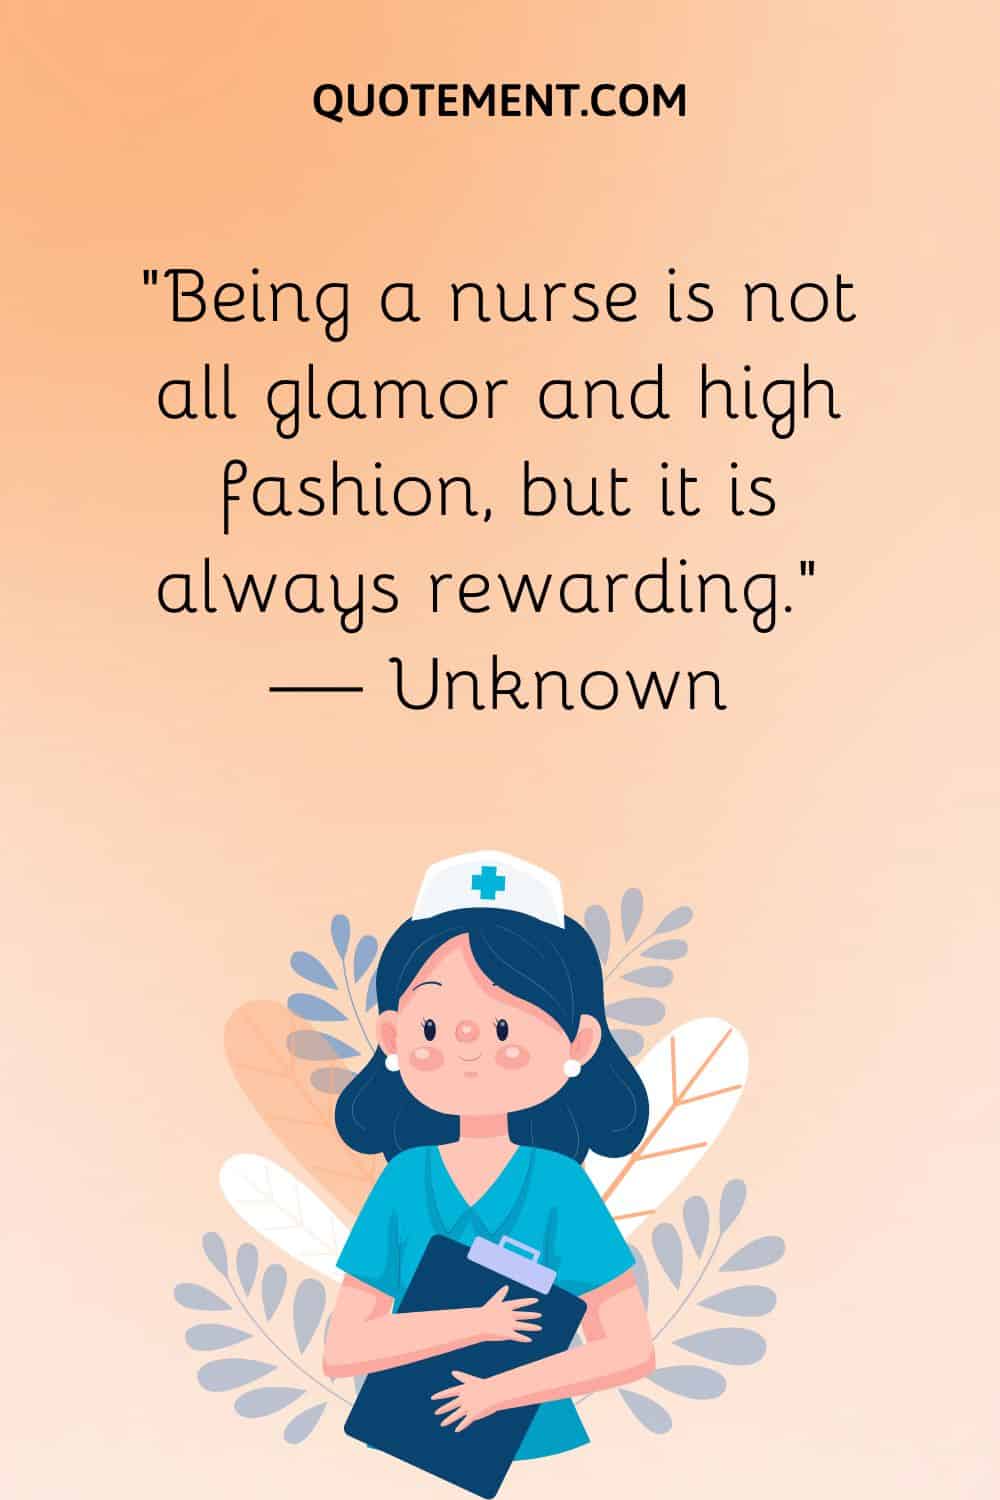 “Being a nurse is not all glamor and high fashion, but it is always rewarding.” — Unknown